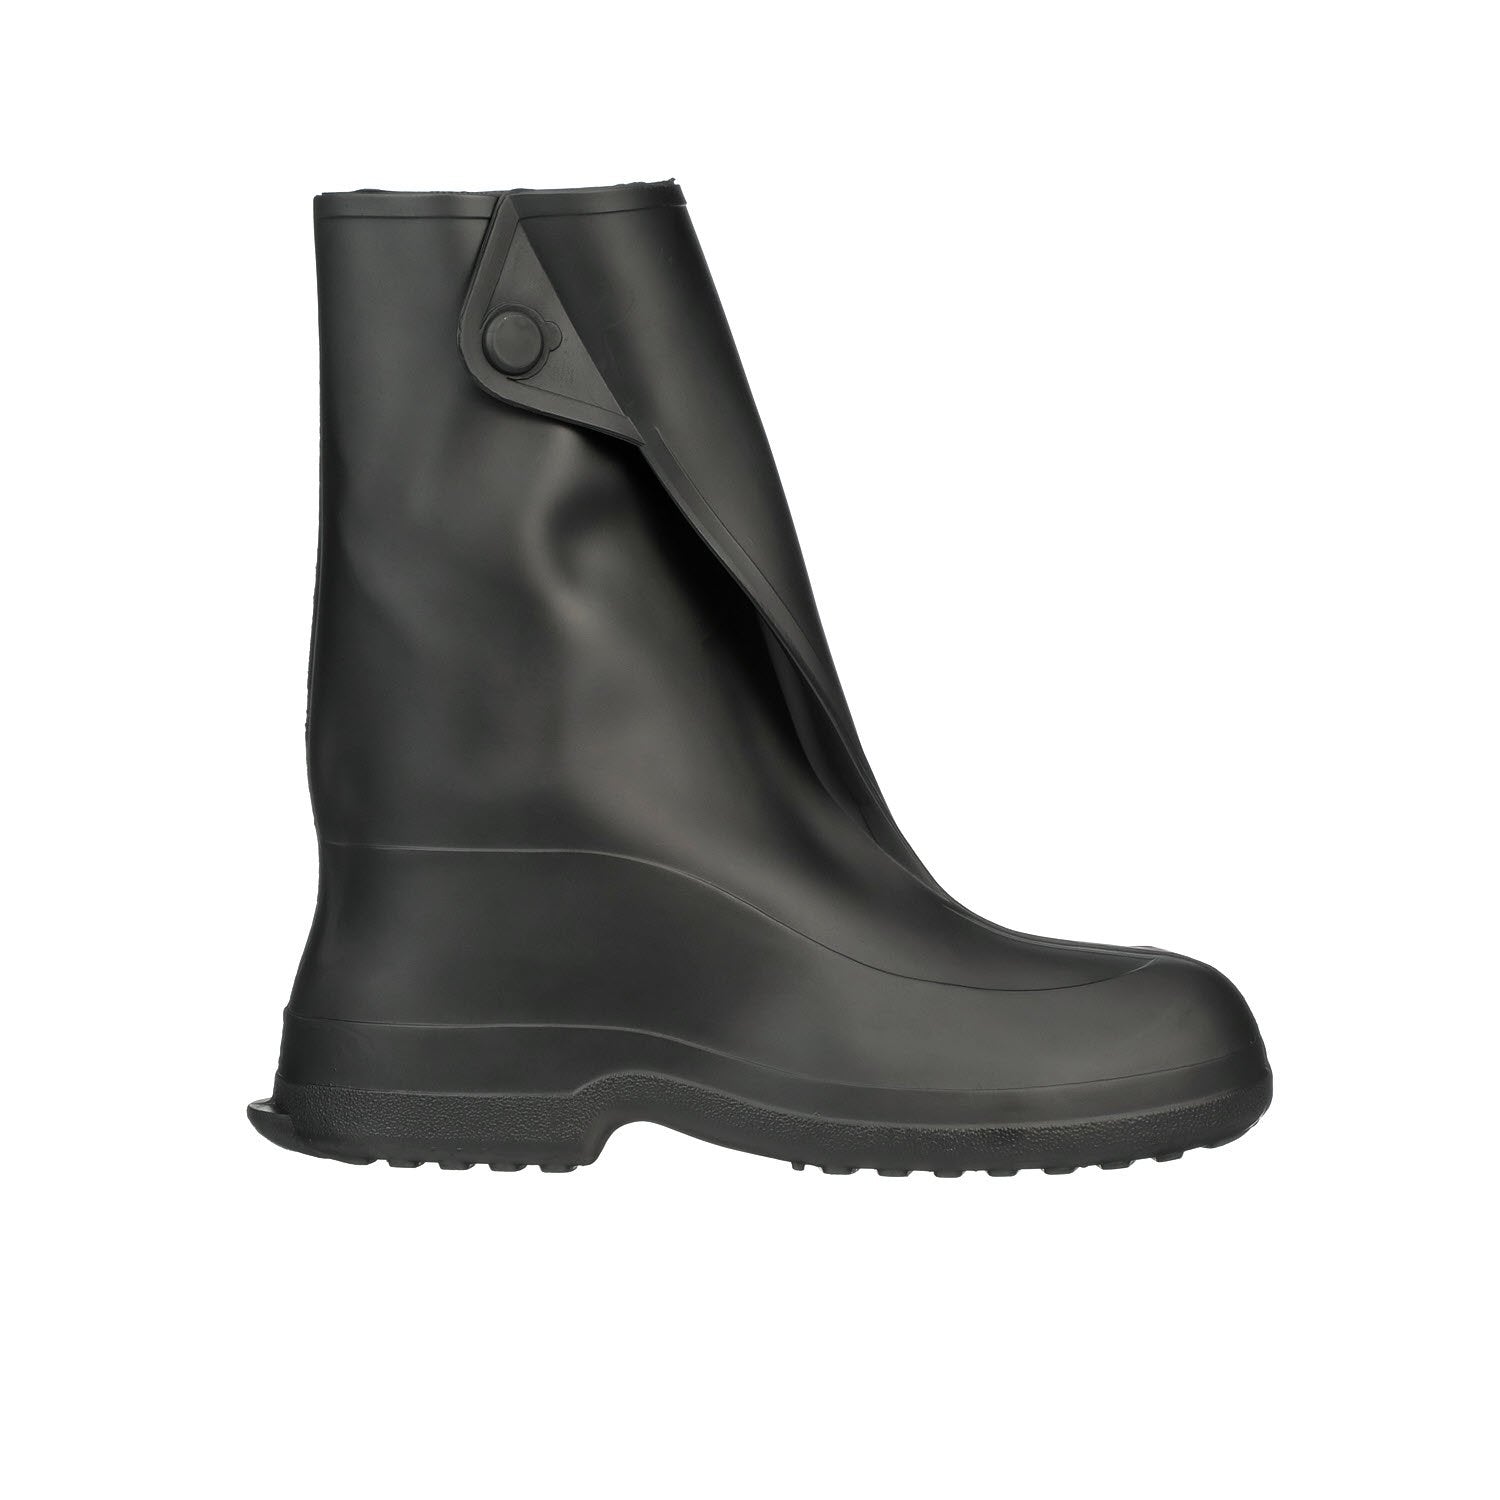 TINGLEY 10" CLOSURE BOOT STYLE 1400